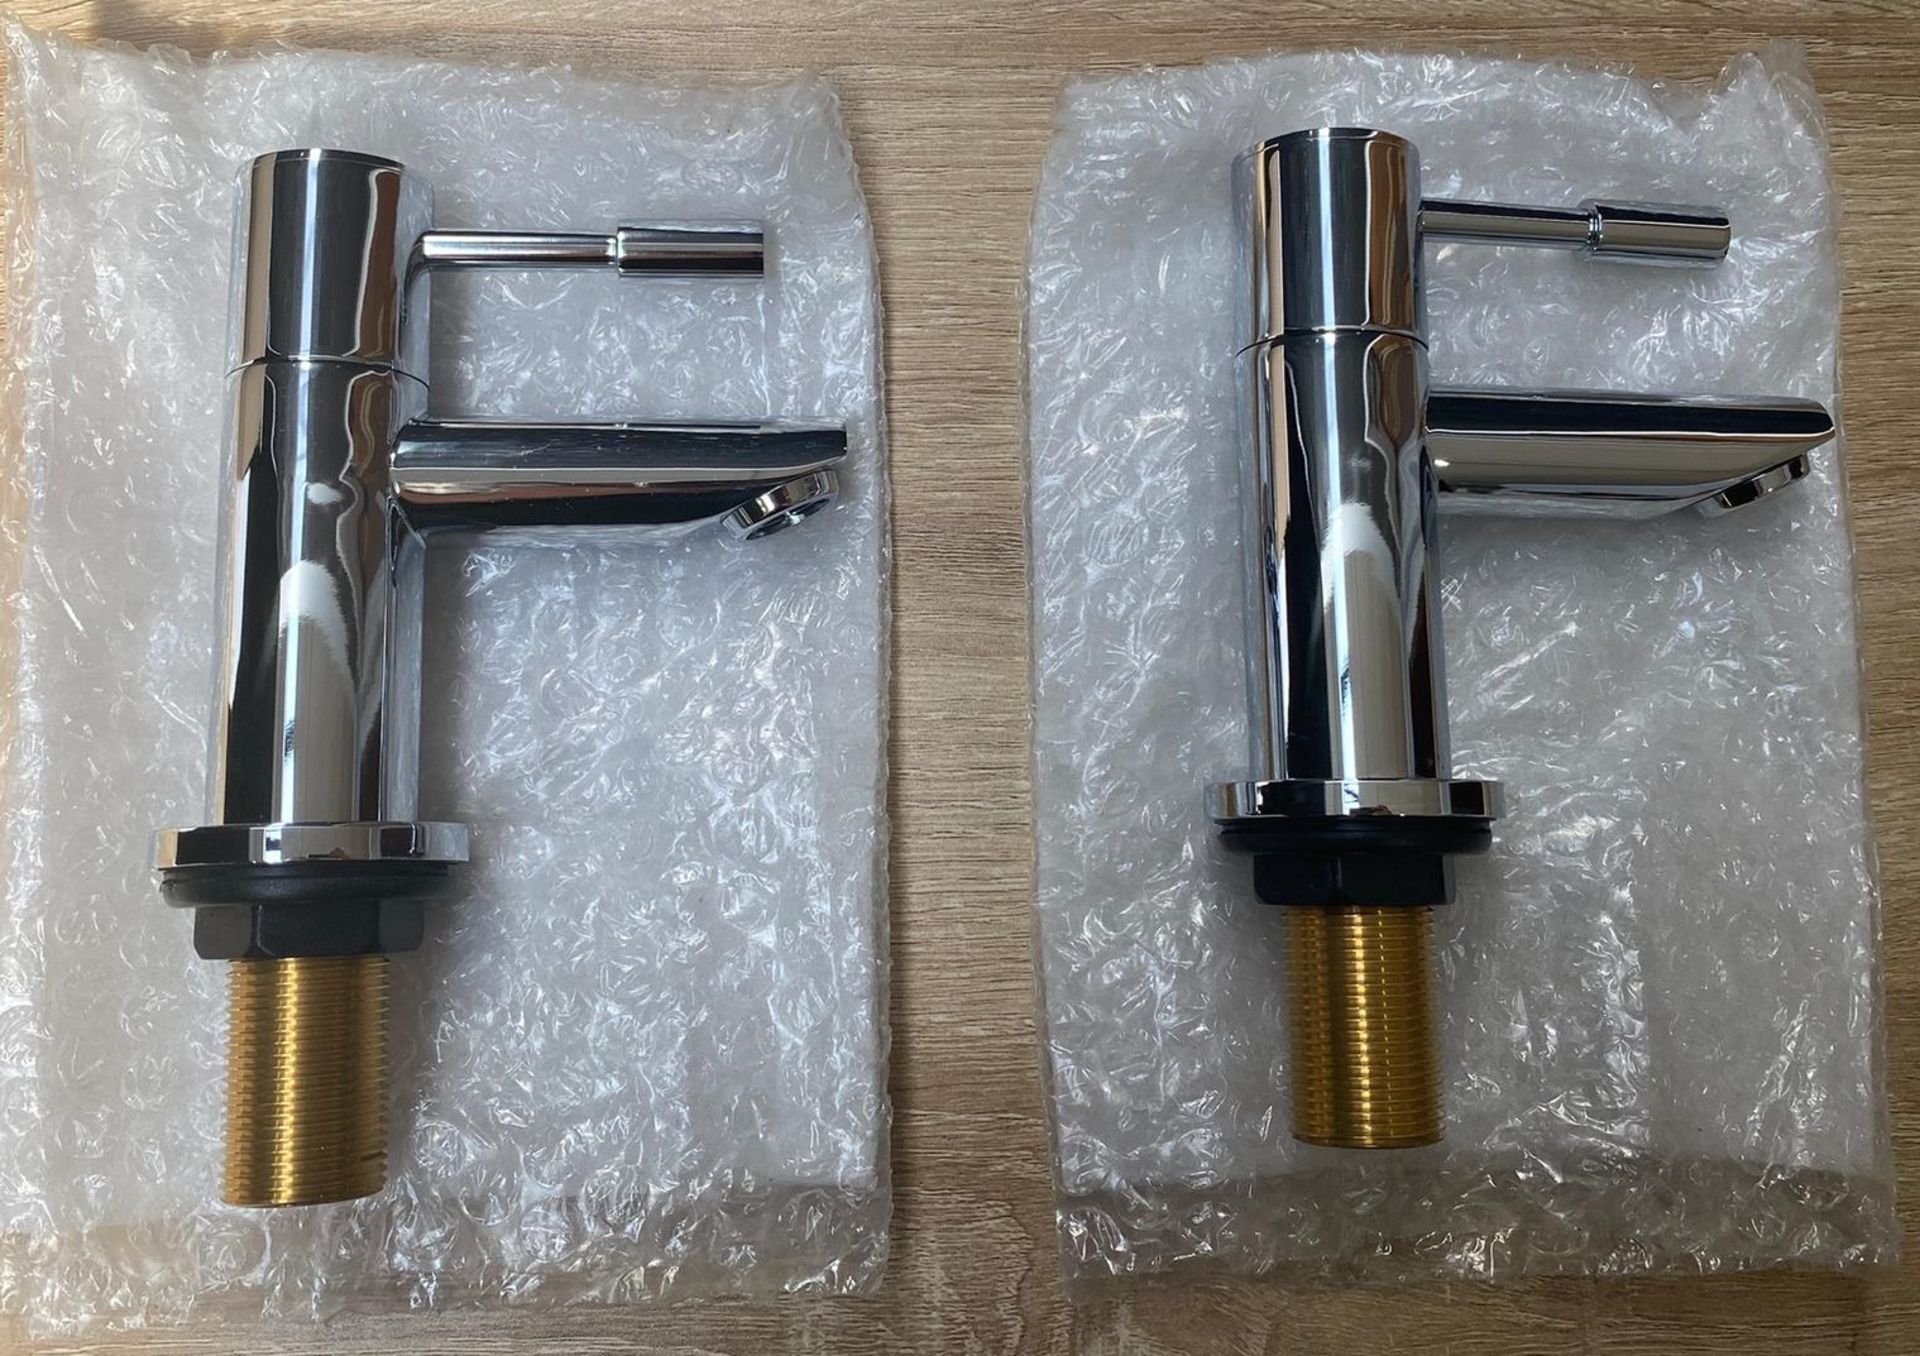 1 x Pair of Synergy Modern Bathroom Taps - Code: F01 - New Boxed Stock - Location: Altrincham WA14 - - Image 3 of 3